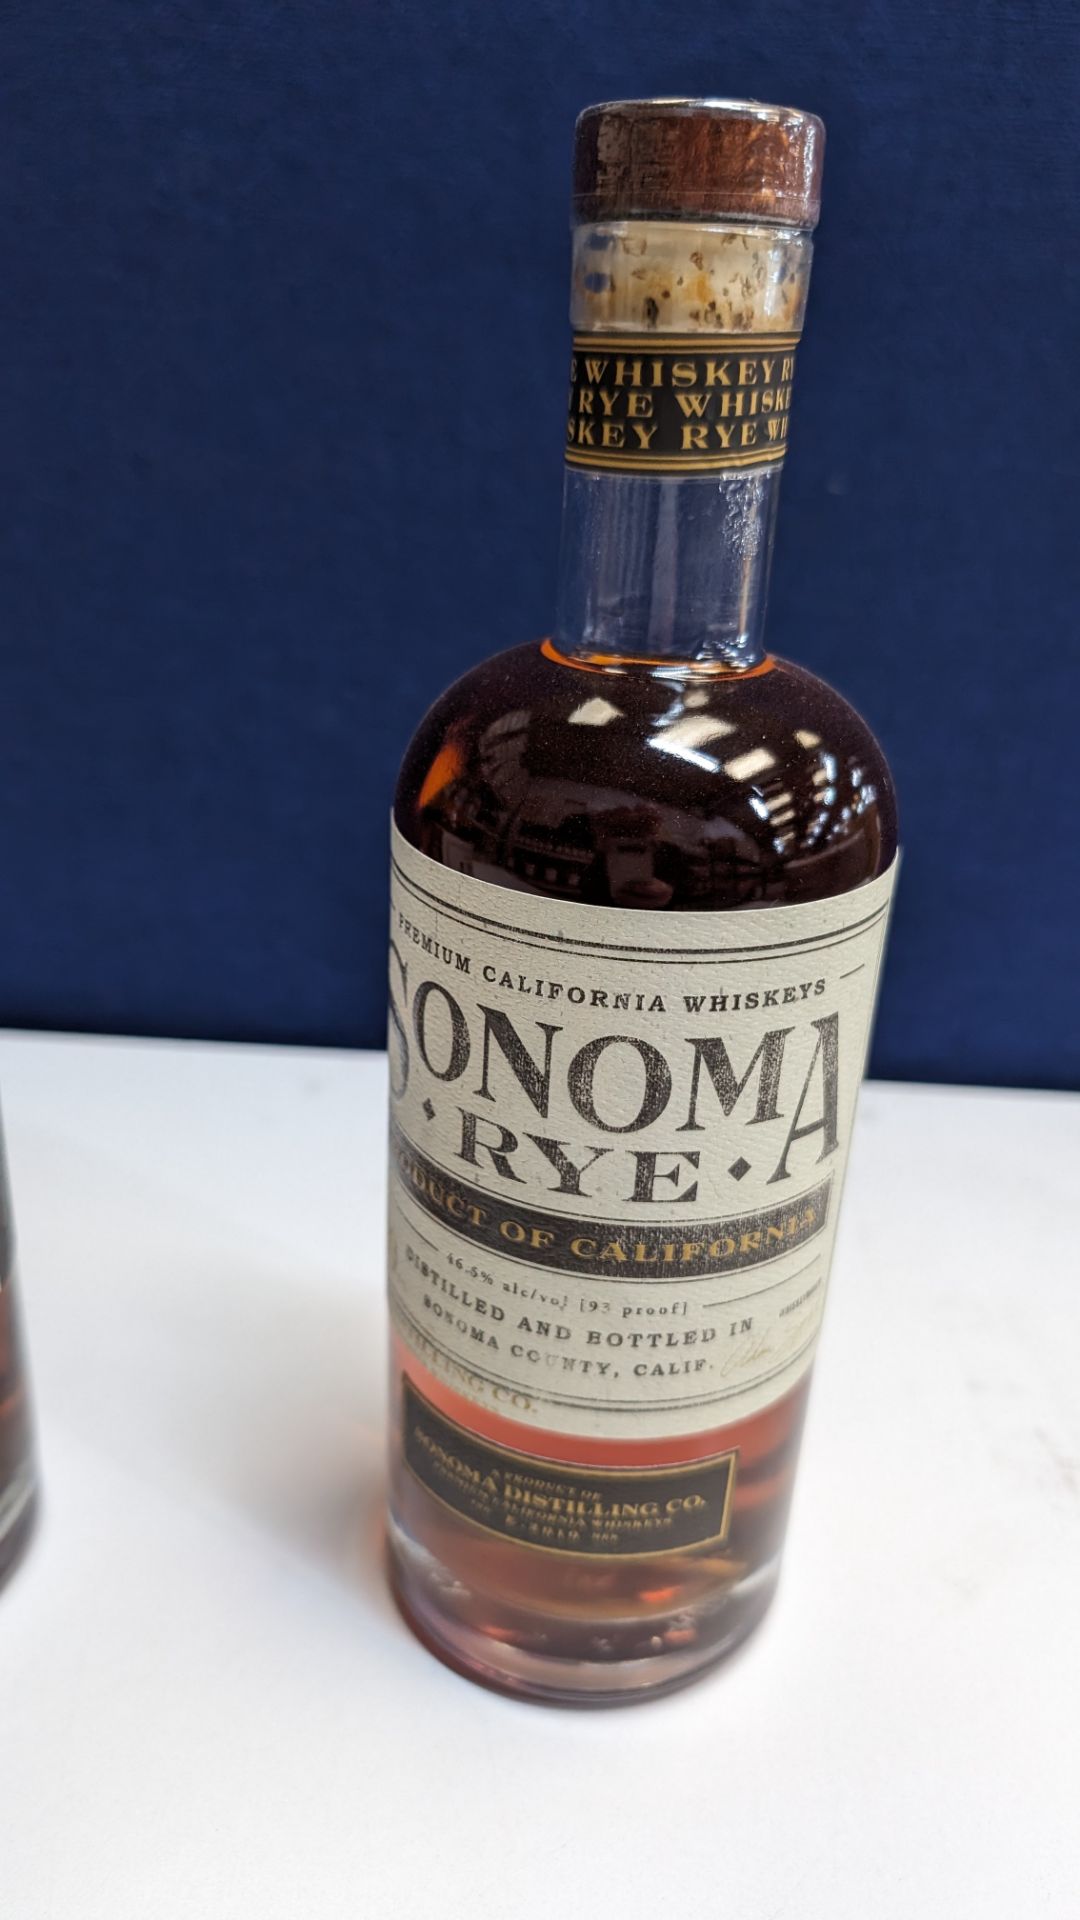 2 off 700ml bottles of Sonoma Rye Whiskey. 46.5% alc/vol (93 proof). Distilled and bottled in Sono - Image 4 of 7